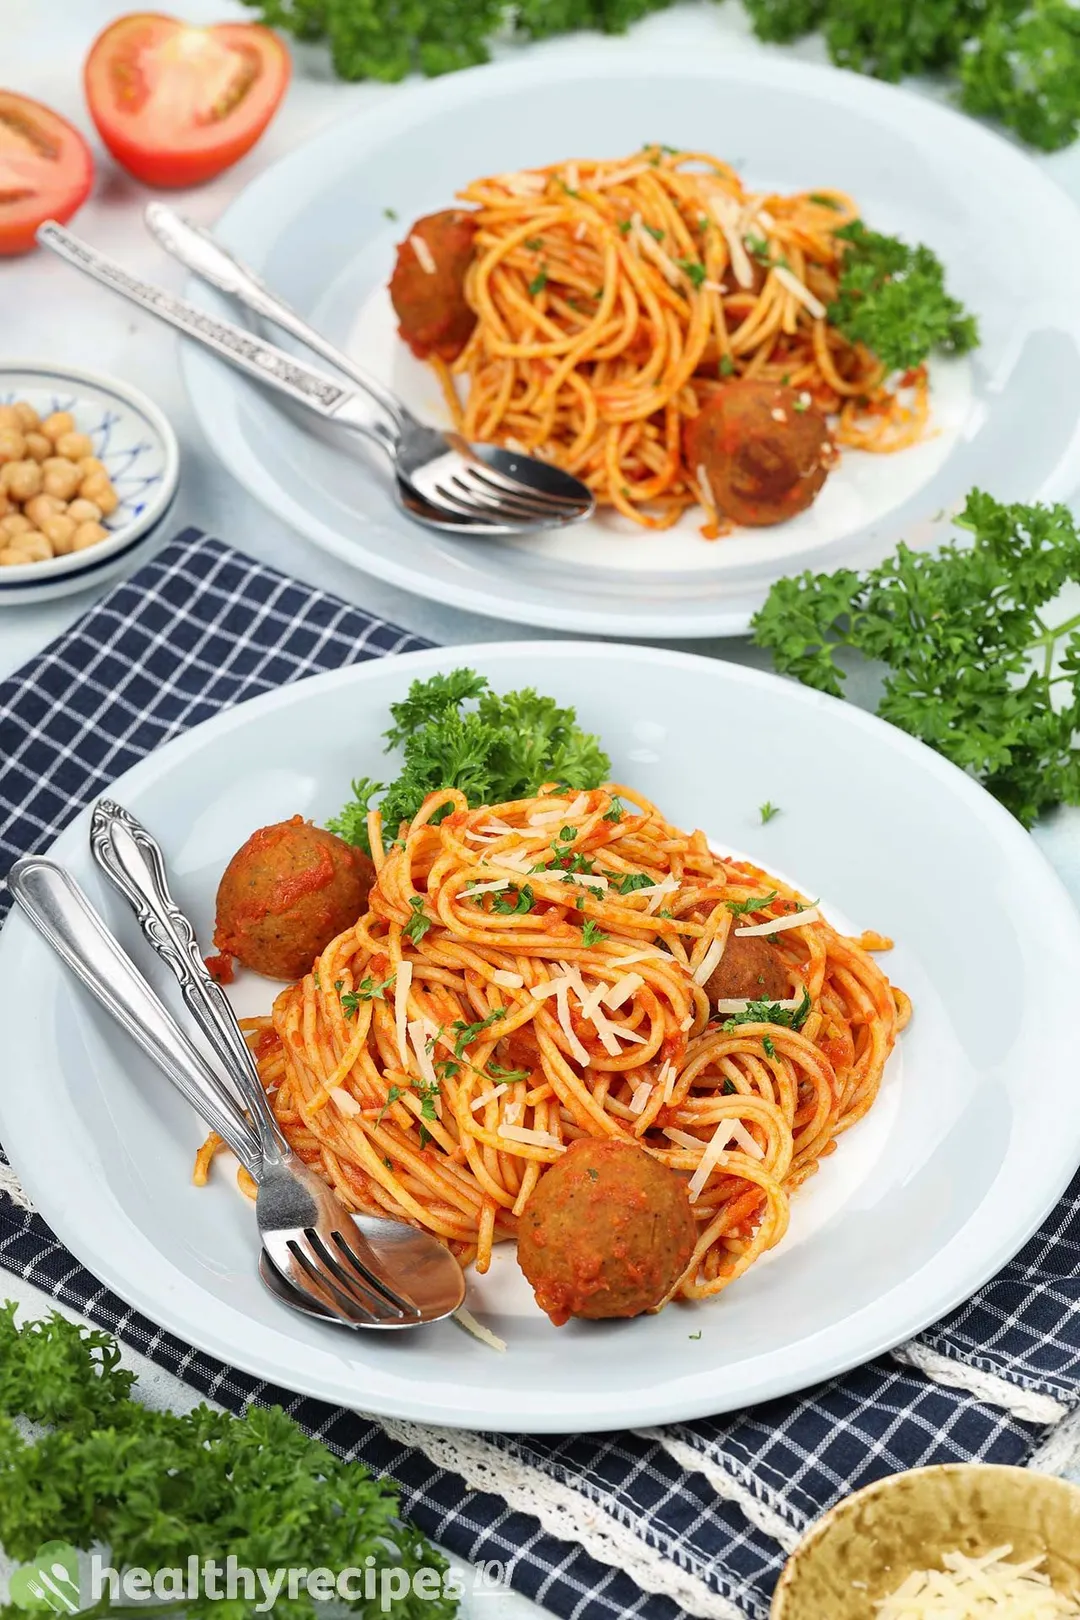 Two plates of chickpea meatball spaghetti with spoons and forks on the side, laid near parsley leaves.